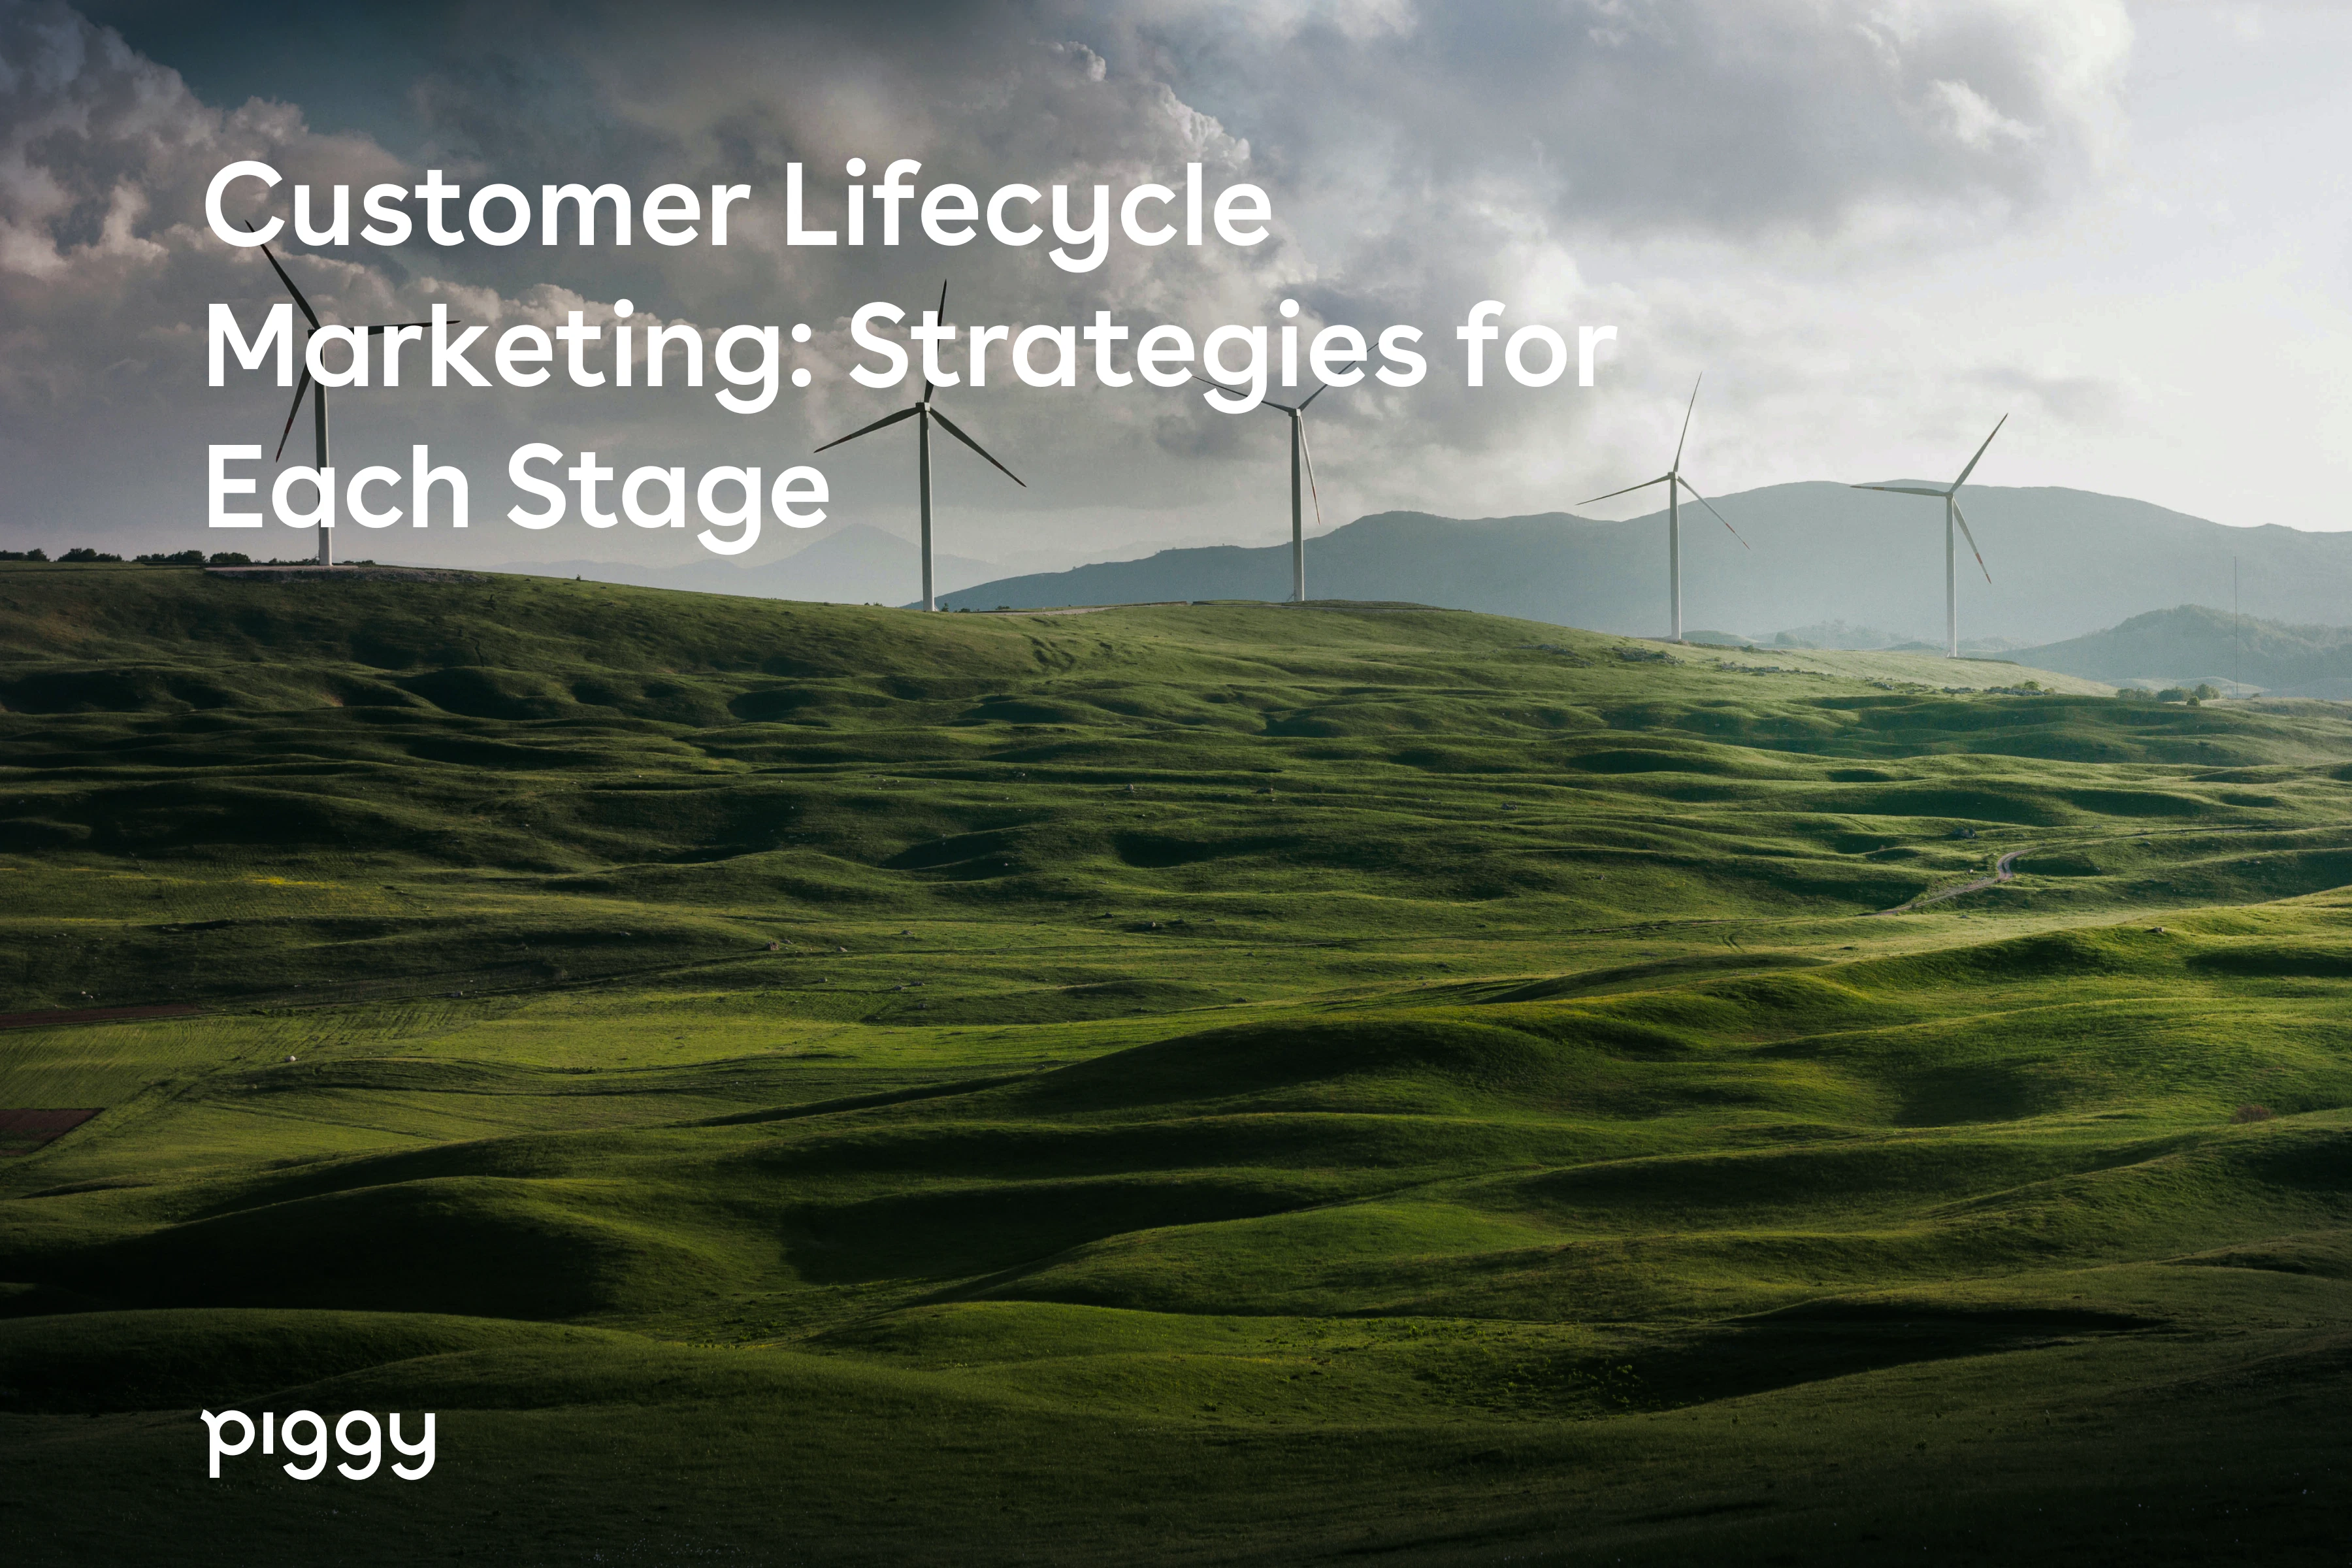 customer-lifecycle-management-stages